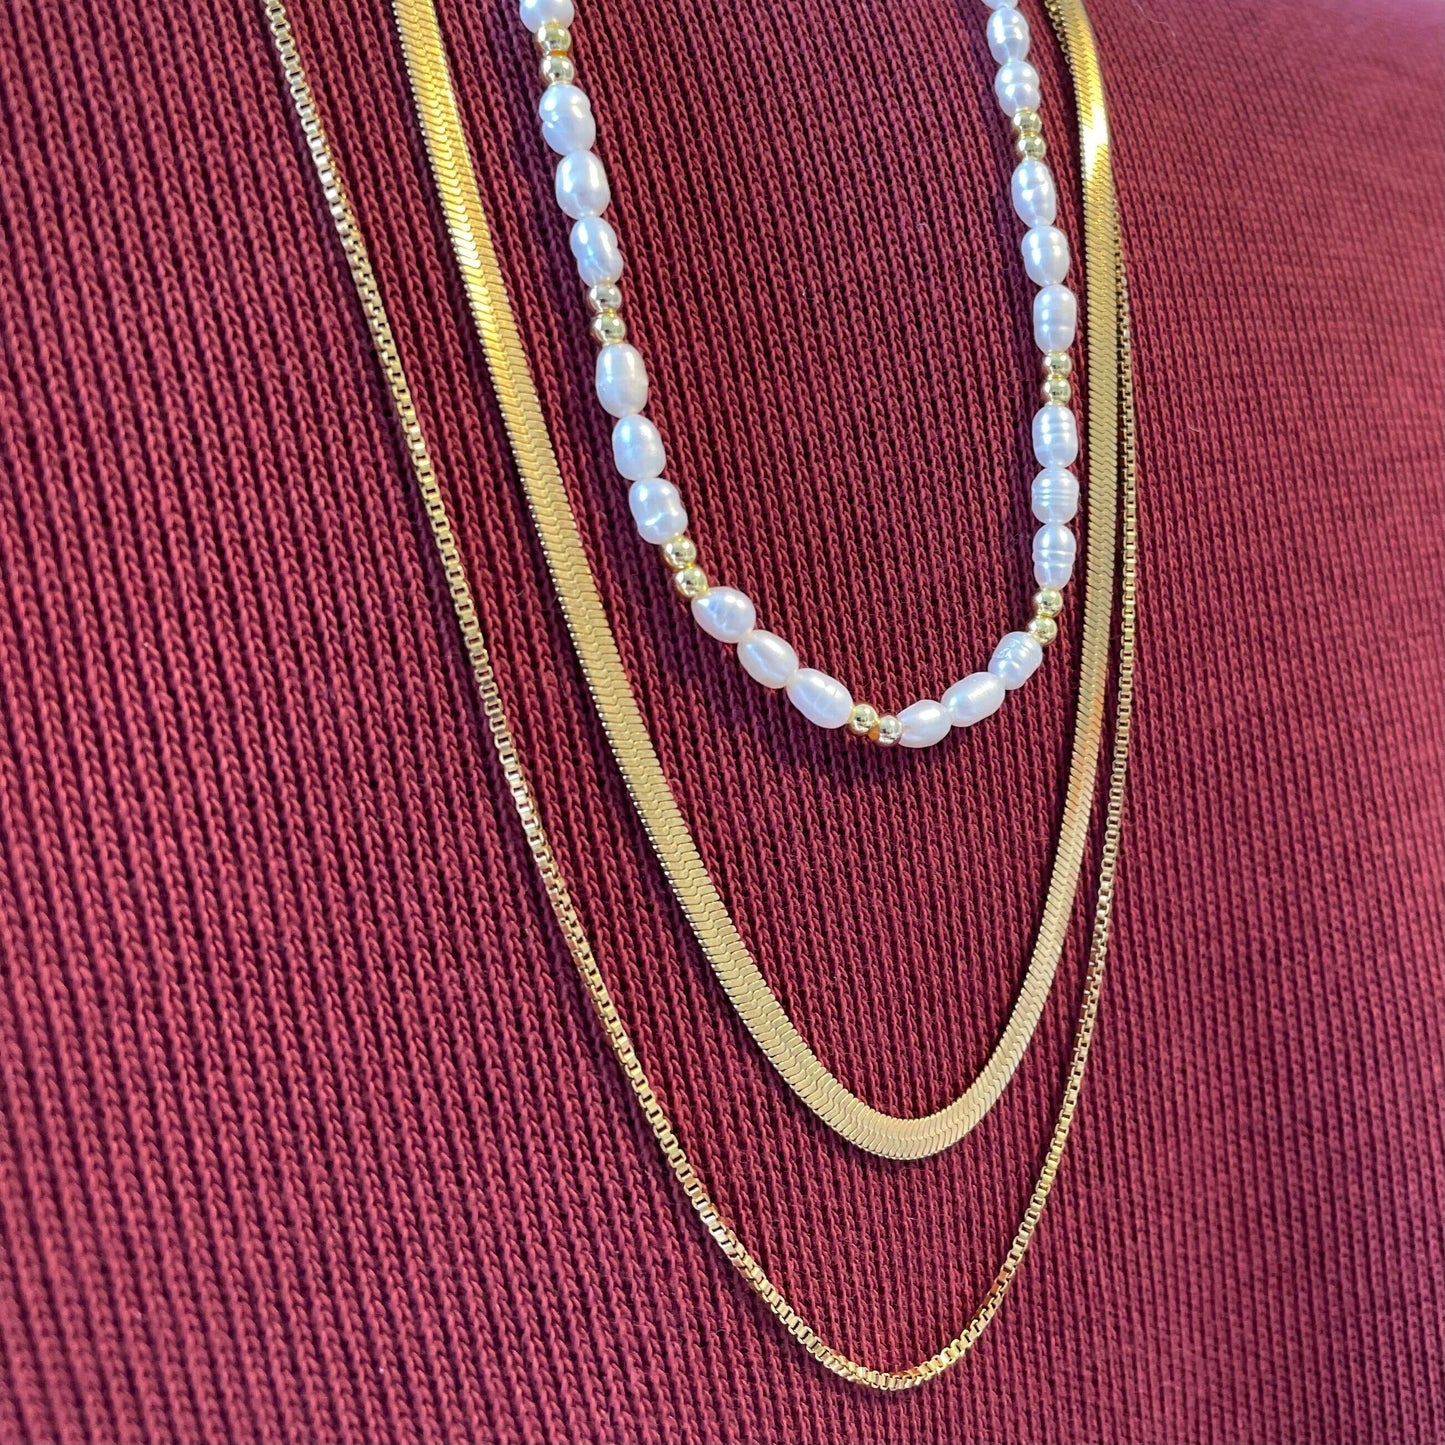 Classy freshwater pearls and gold-plated beads necklace with a stainless steel necklace set